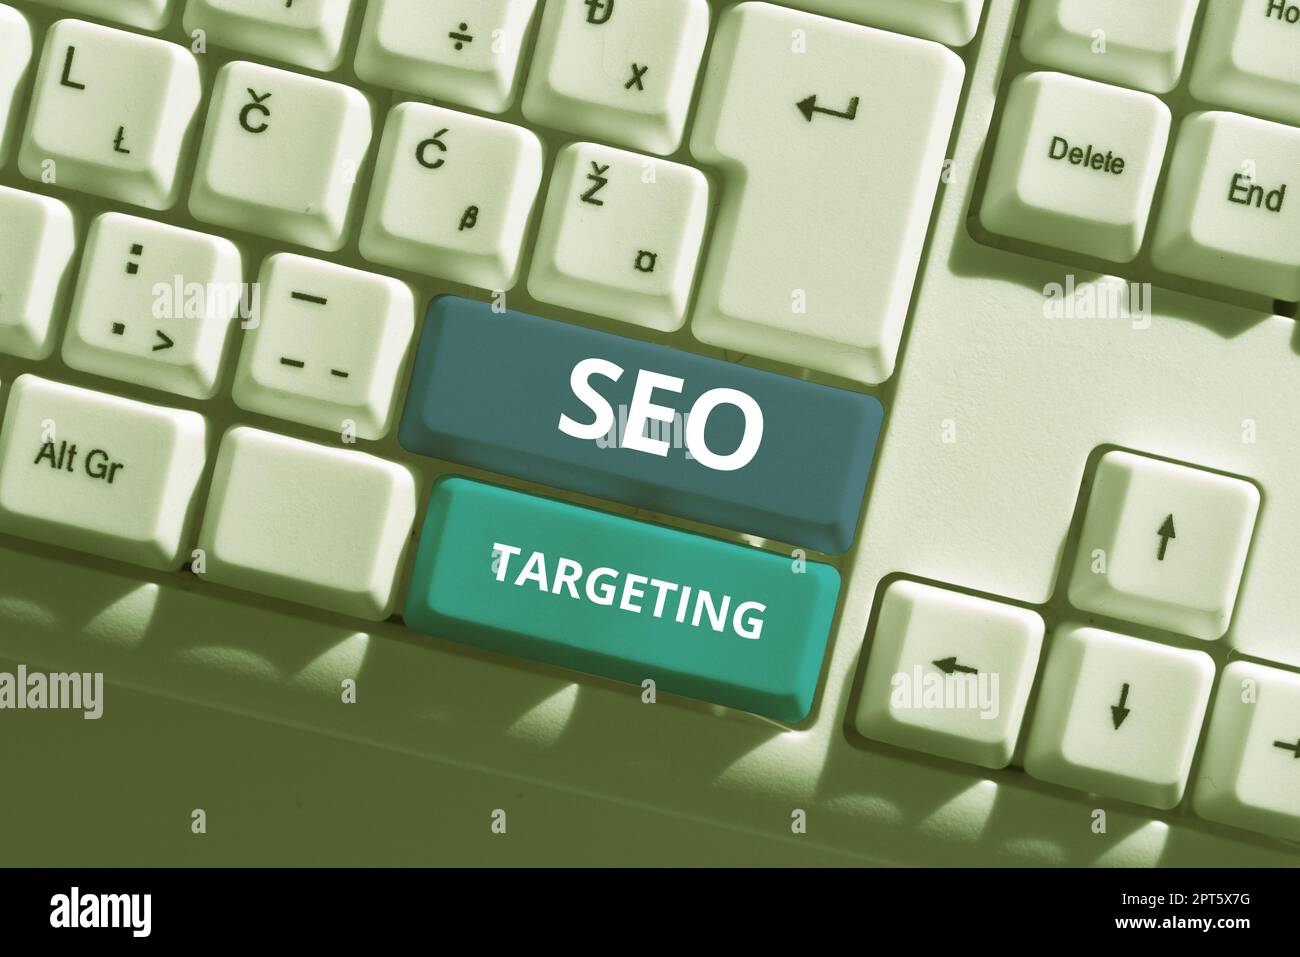 Text showing inspiration Seo Targeting, Business approach Specific Keywords for Location Landing Page Top Domain Stock Photo